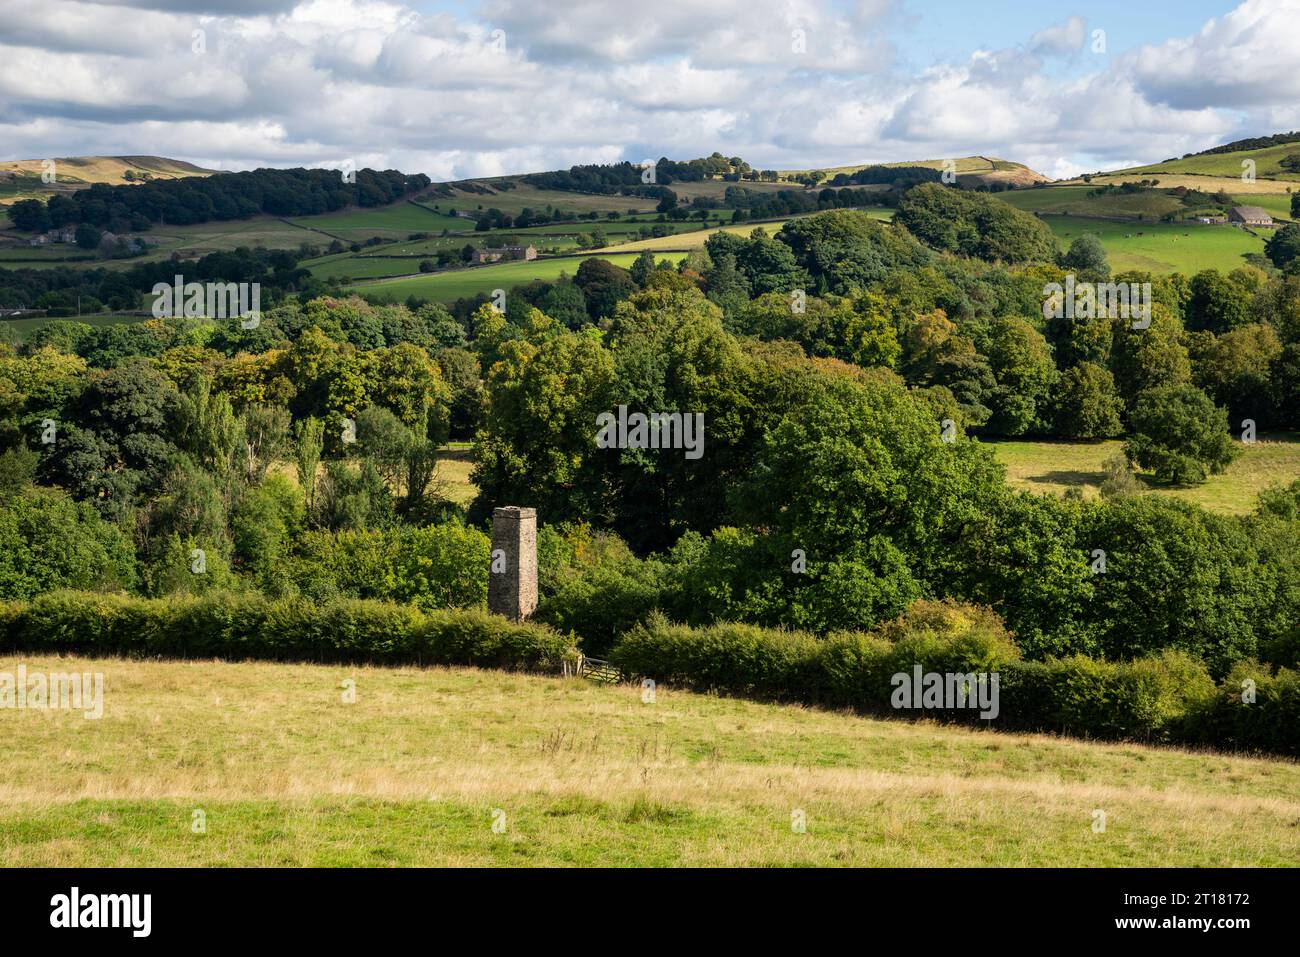 Hills around Bollington east of Macclesfield, Cheshire, England. An old chimney seen above the trees. Stock Photo